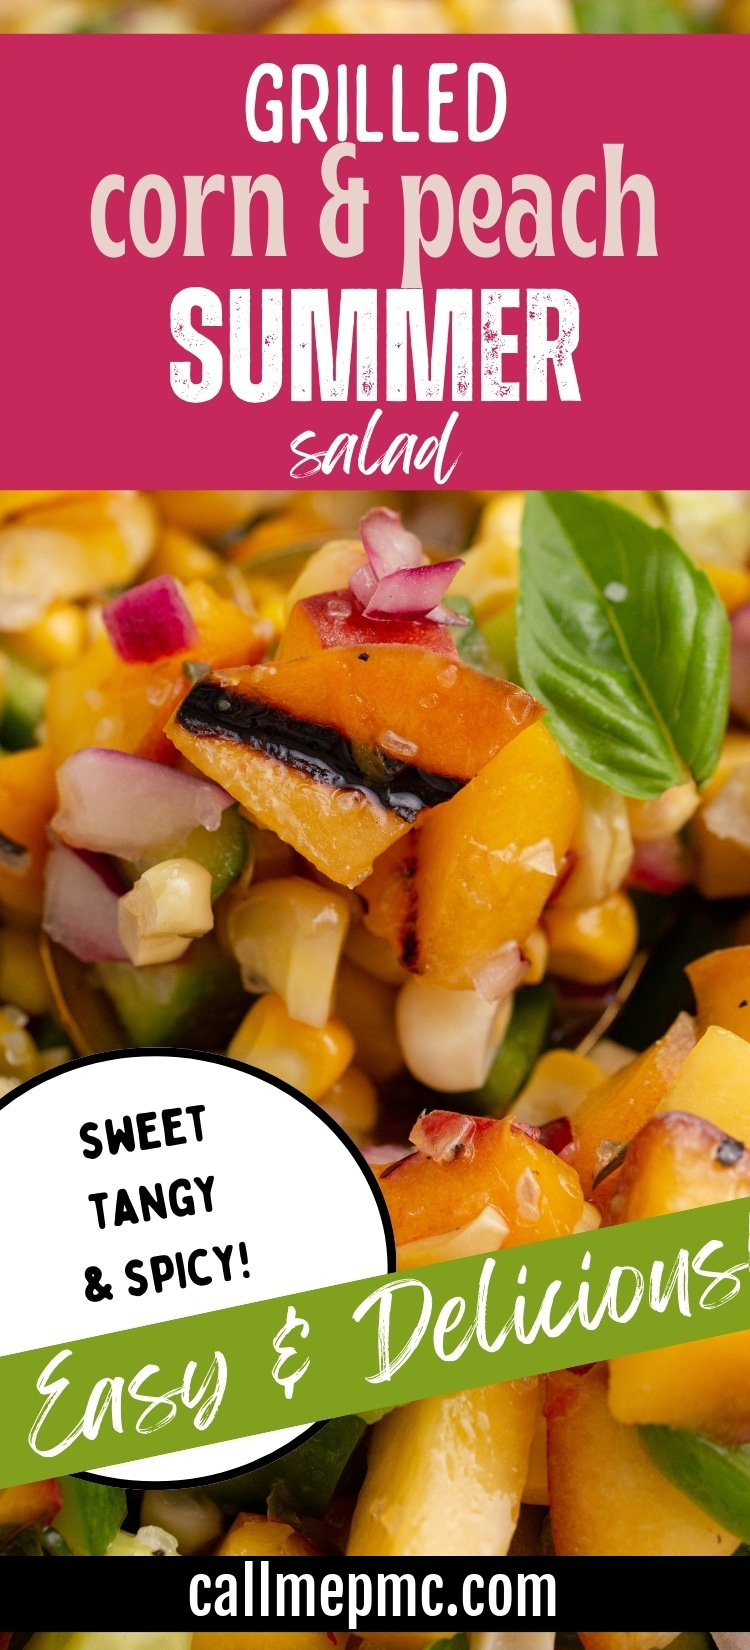 Close-up of grilled corn and peach salad with red onions, basil, and a mix of spices. The text information describes the salad as sweet, tangy, spicy, easy, and delicious, with the website callmepmc.com.